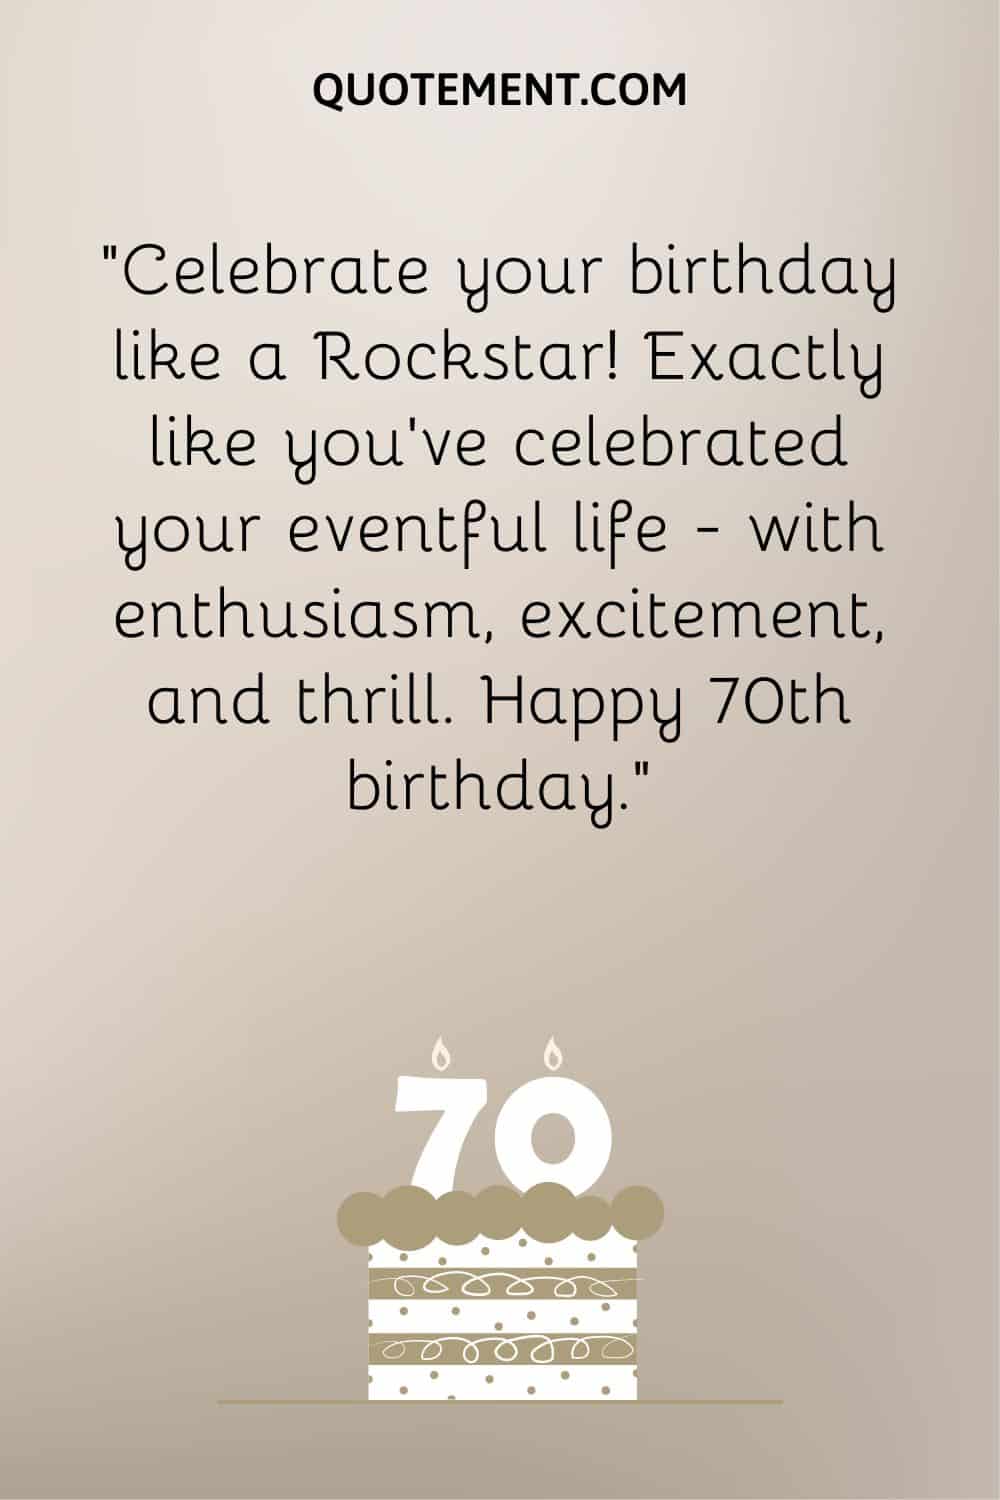 “Celebrate your birthday like a Rockstar! Exactly like you’ve celebrated your eventful life — with enthusiasm, excitement, and thrill. Happy 70th birthday.”